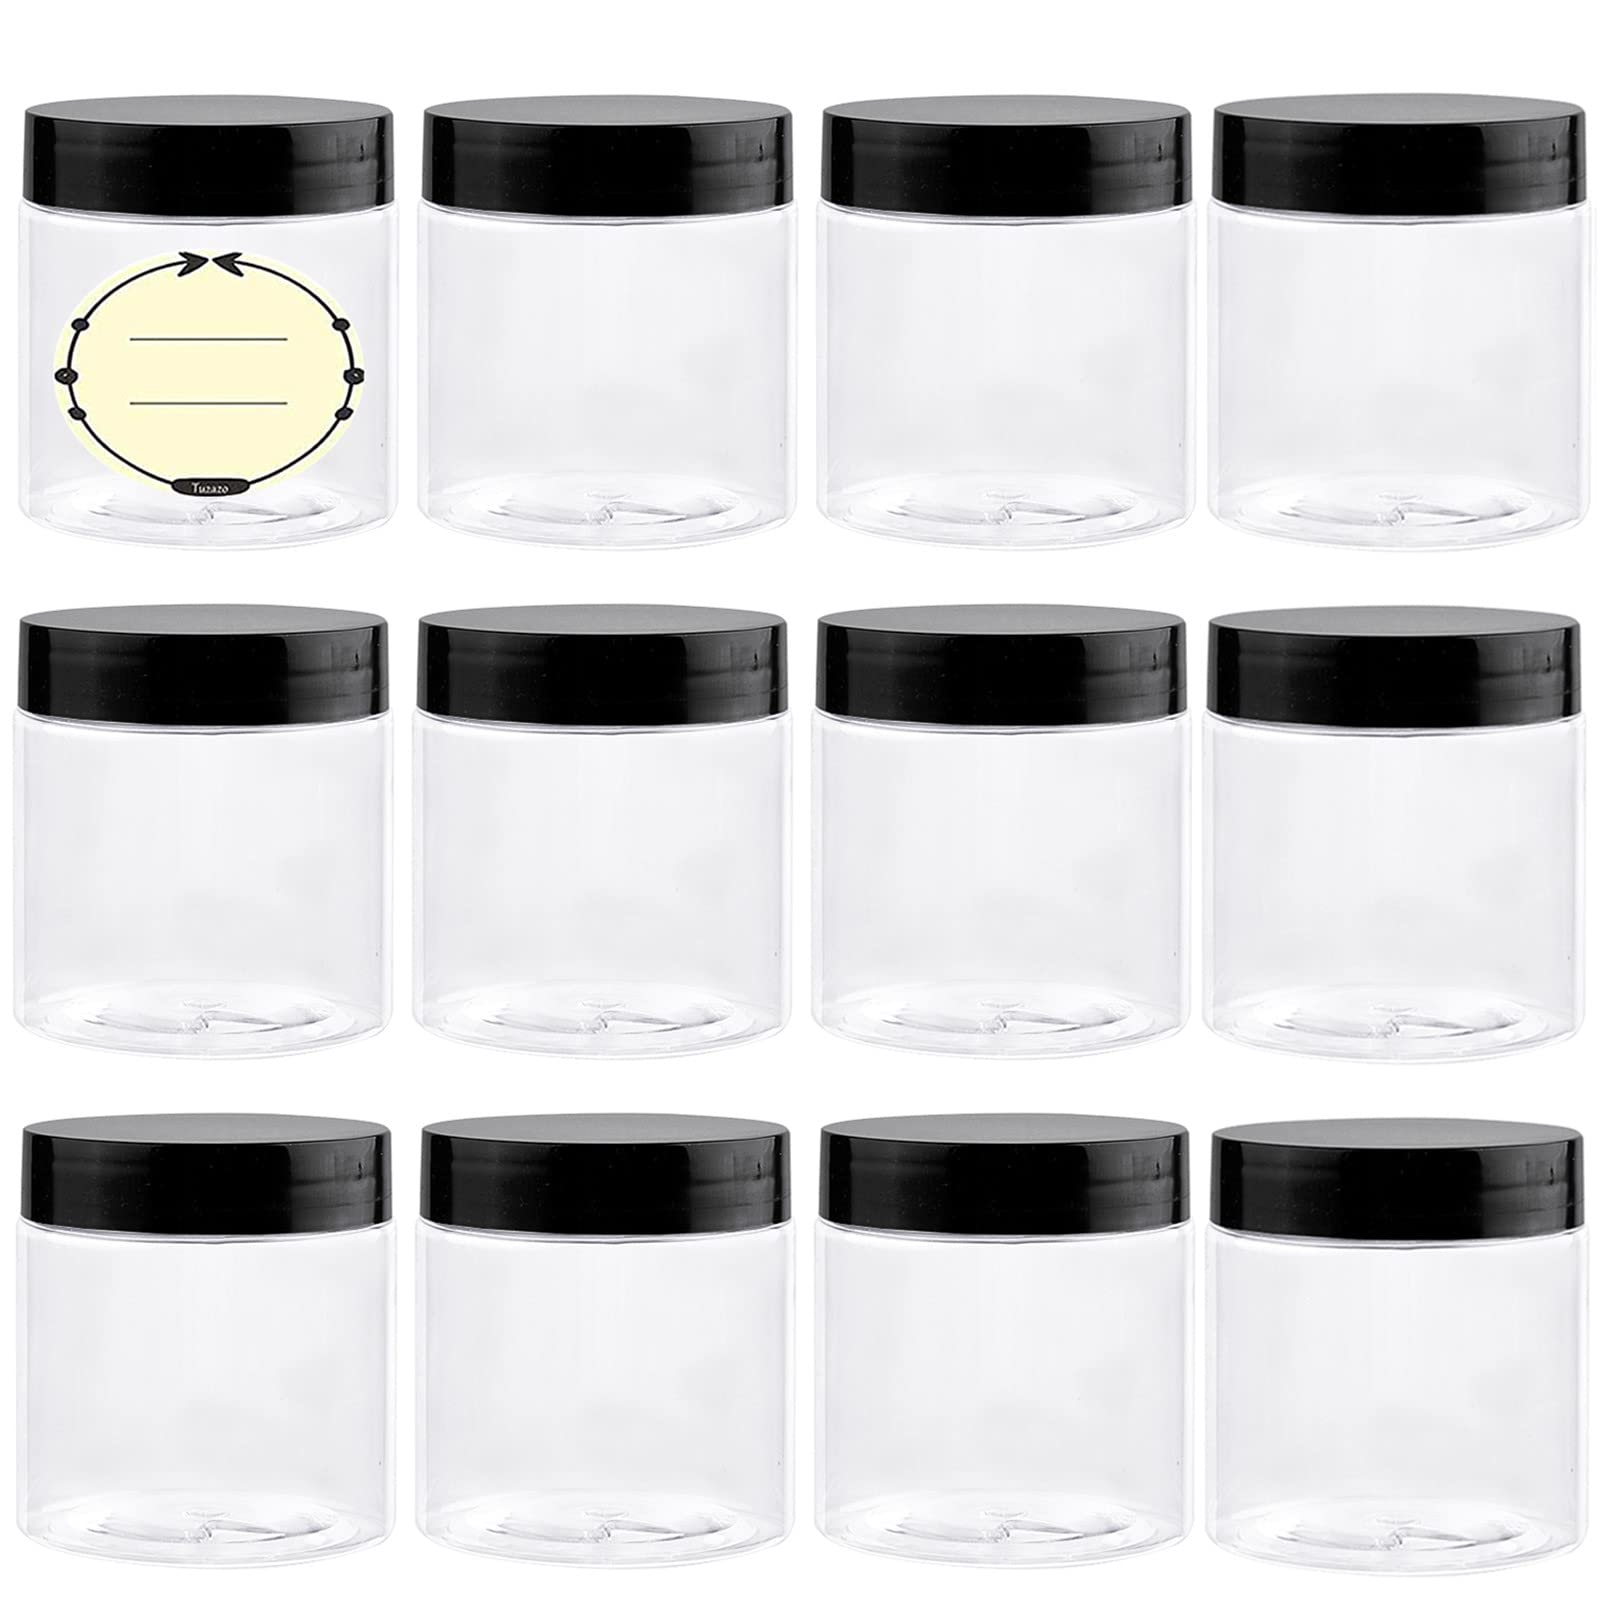 TUZAZO 4 Oz Plastic Containers with Lids and Labels BPA Free